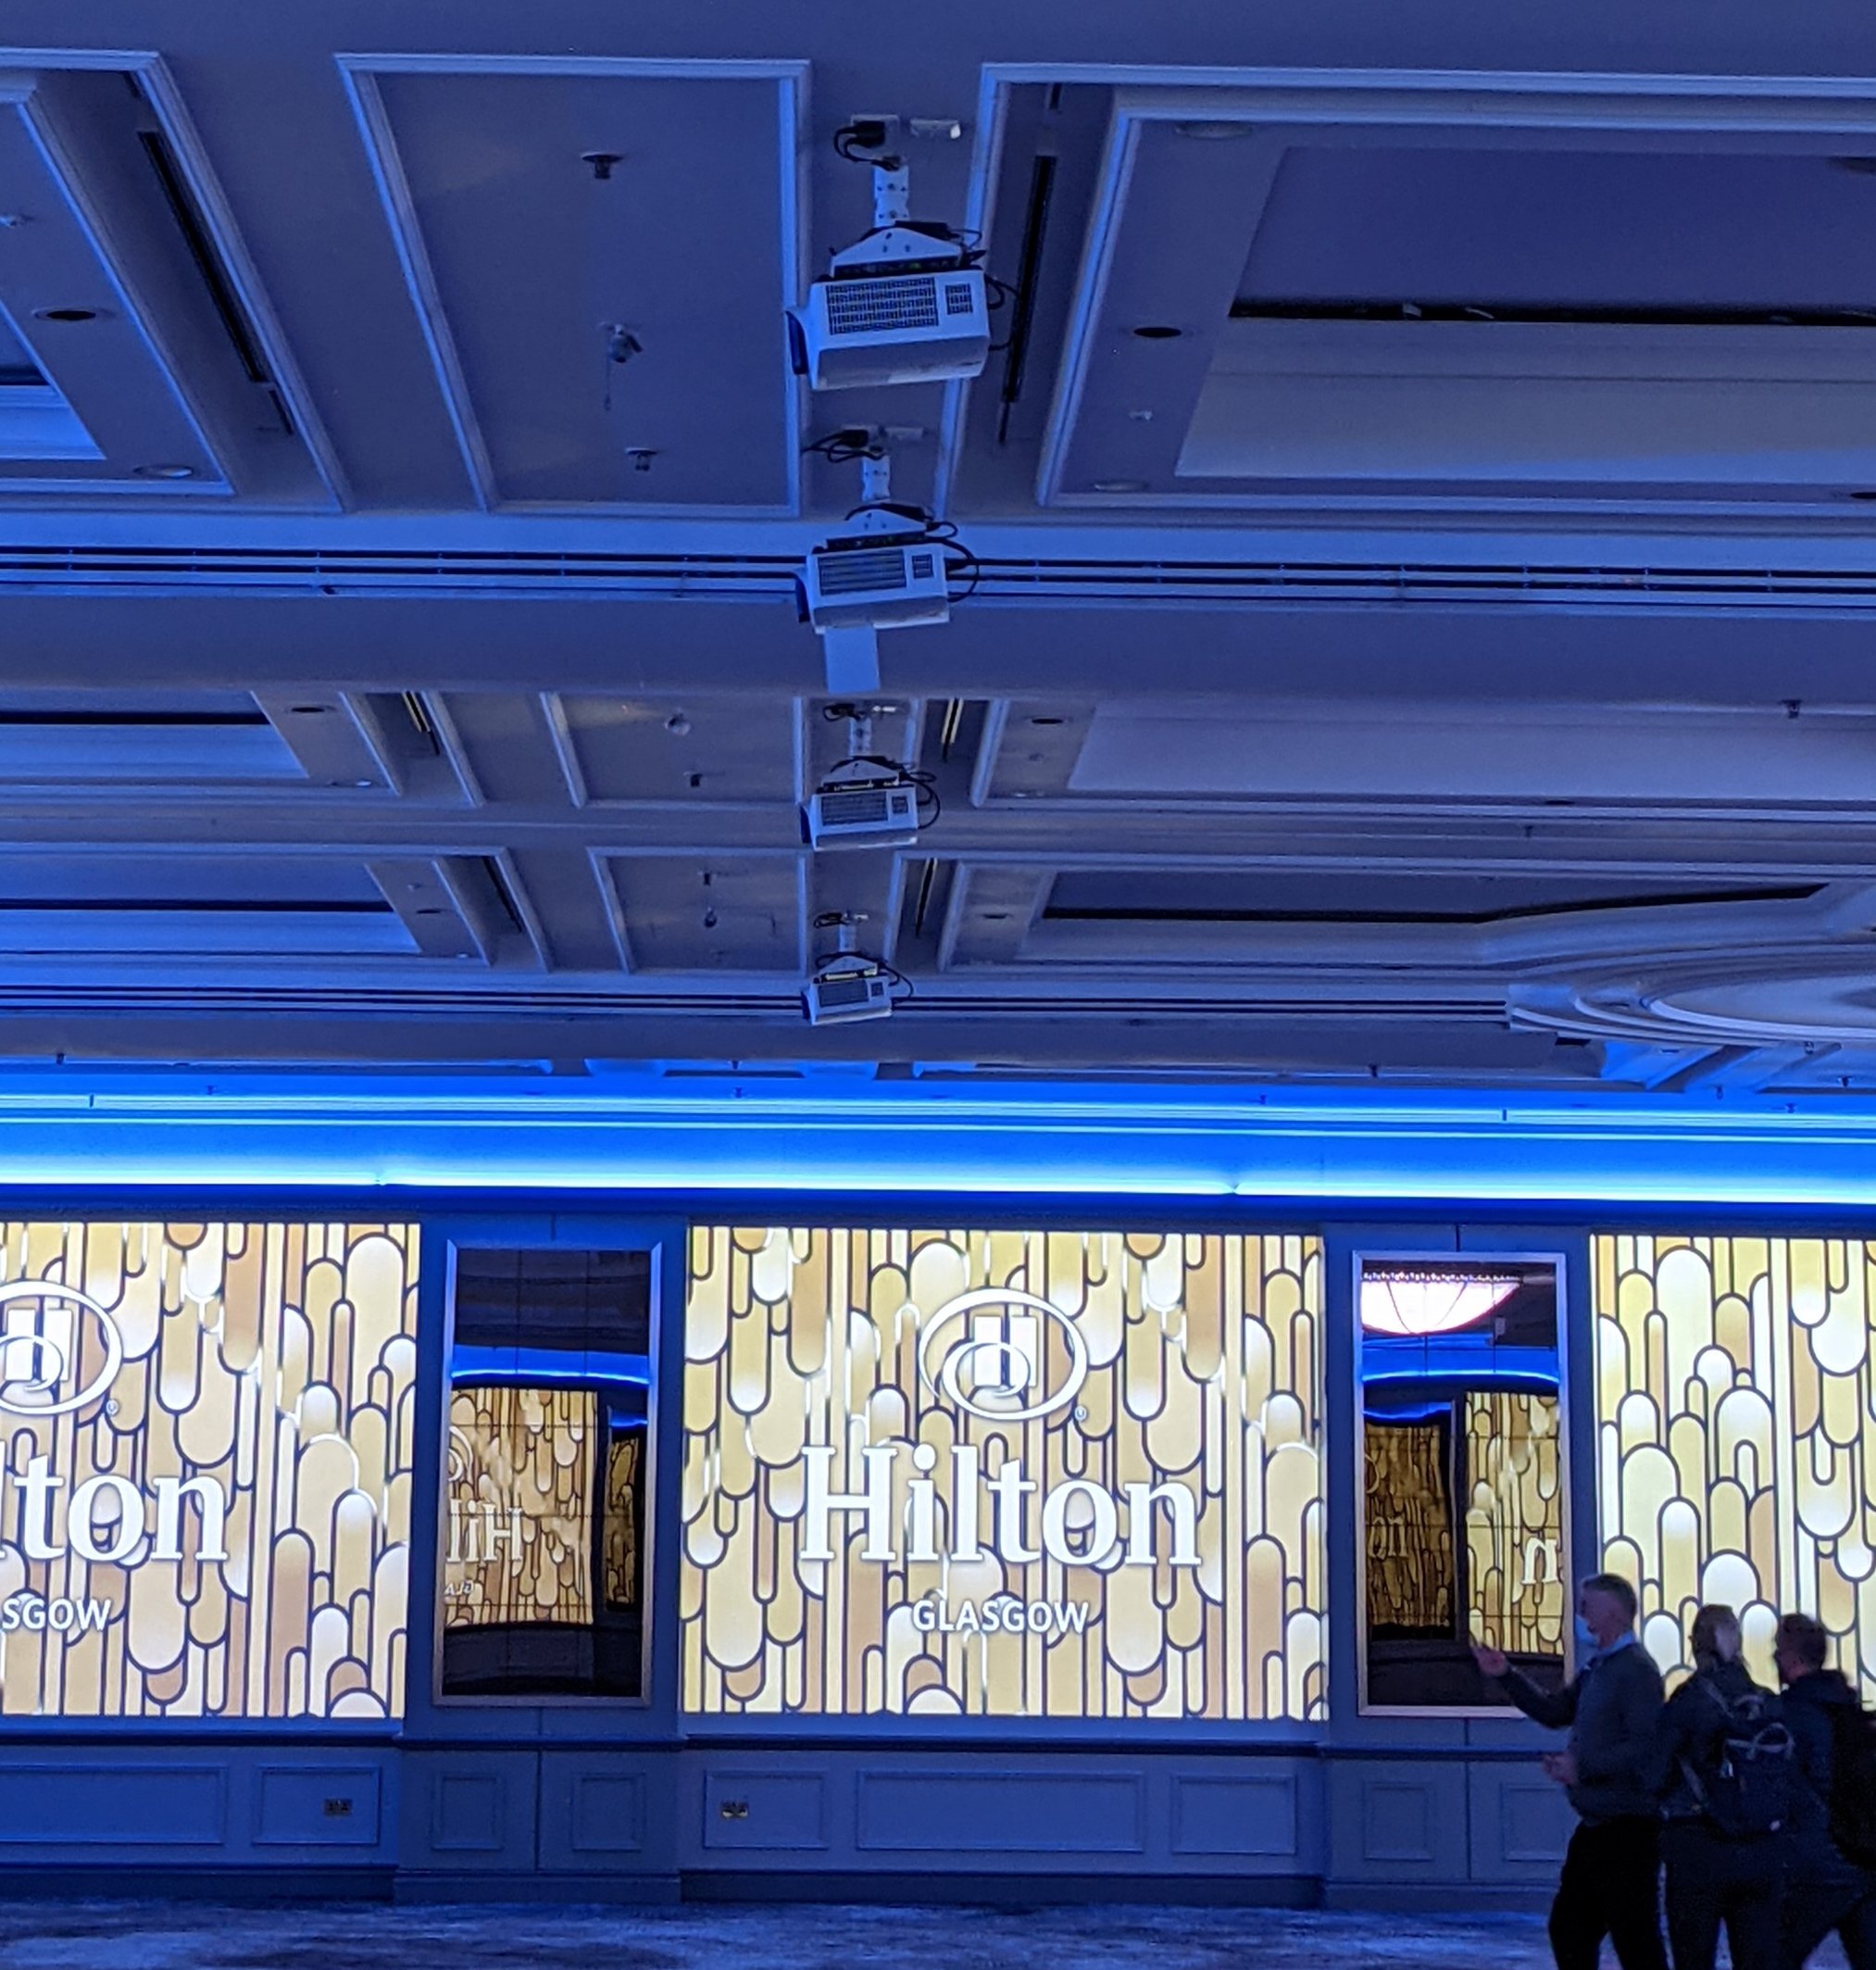 Hilton Hotel Glasgow used BenQ Laser Projector to create extraordinary digital canvas to immerse visitors in iconic ballroom